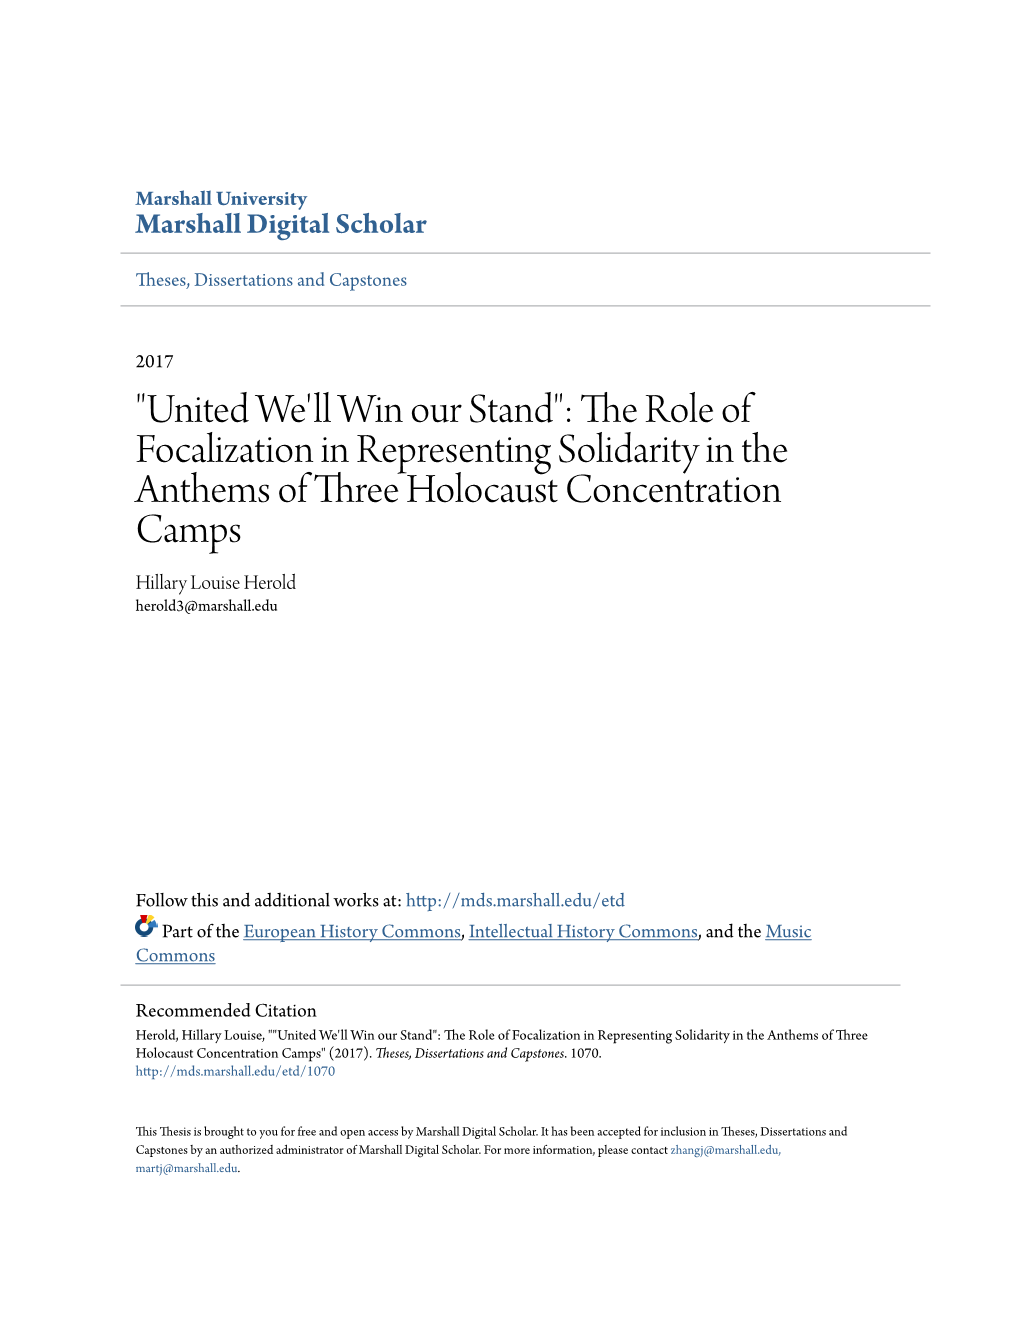 "United We'll Win Our Stand": the Role of Focalization in Representing